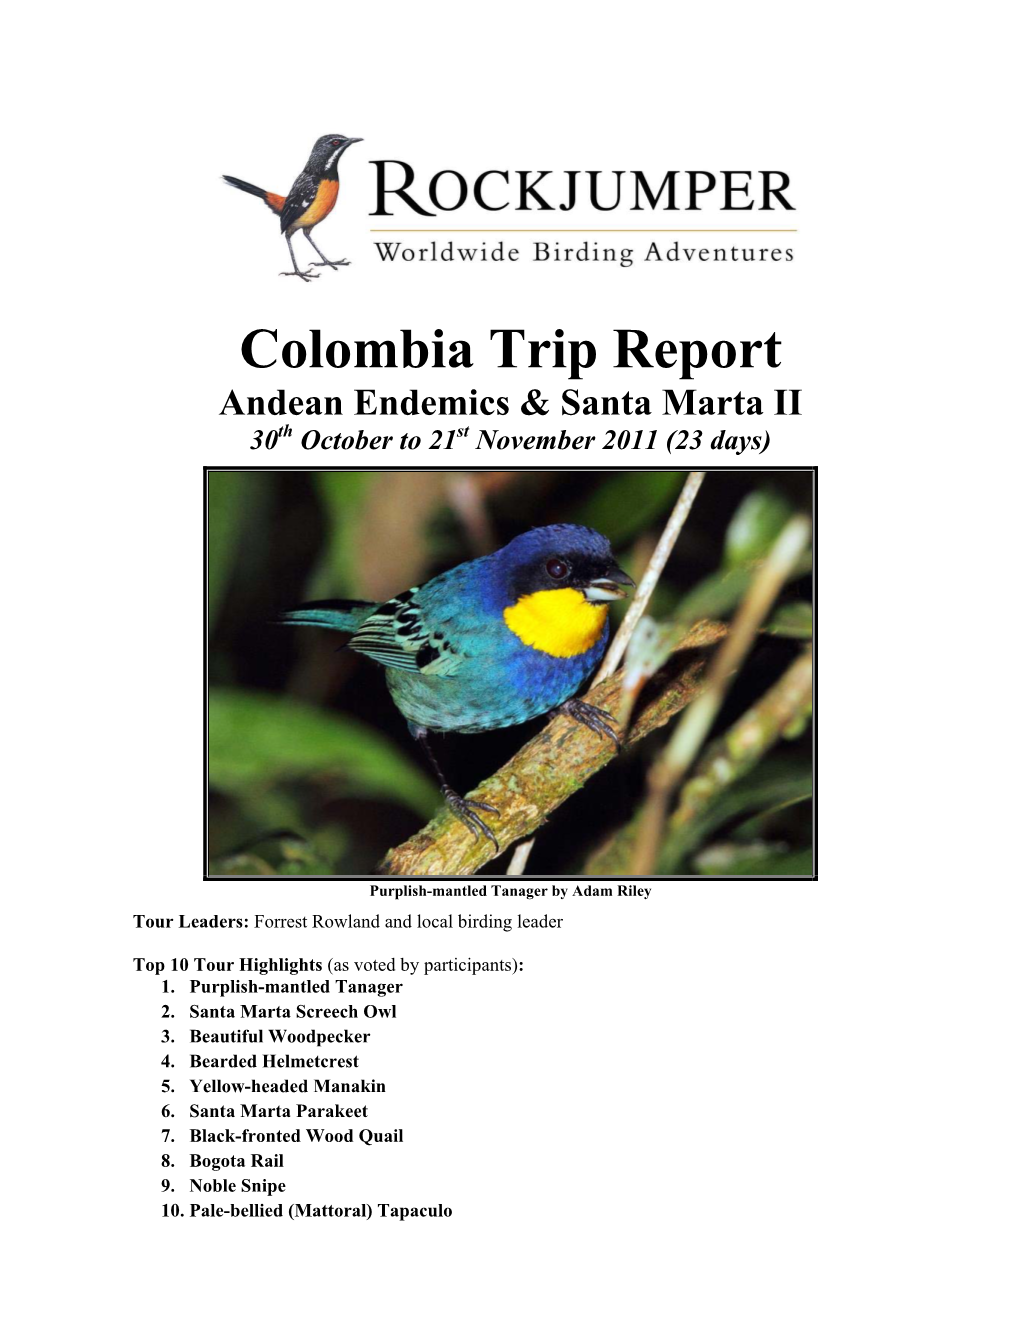 Colombia Trip Report Andean Endemics & Santa Marta II 30Th October to 21St November 2011 (23 Days)